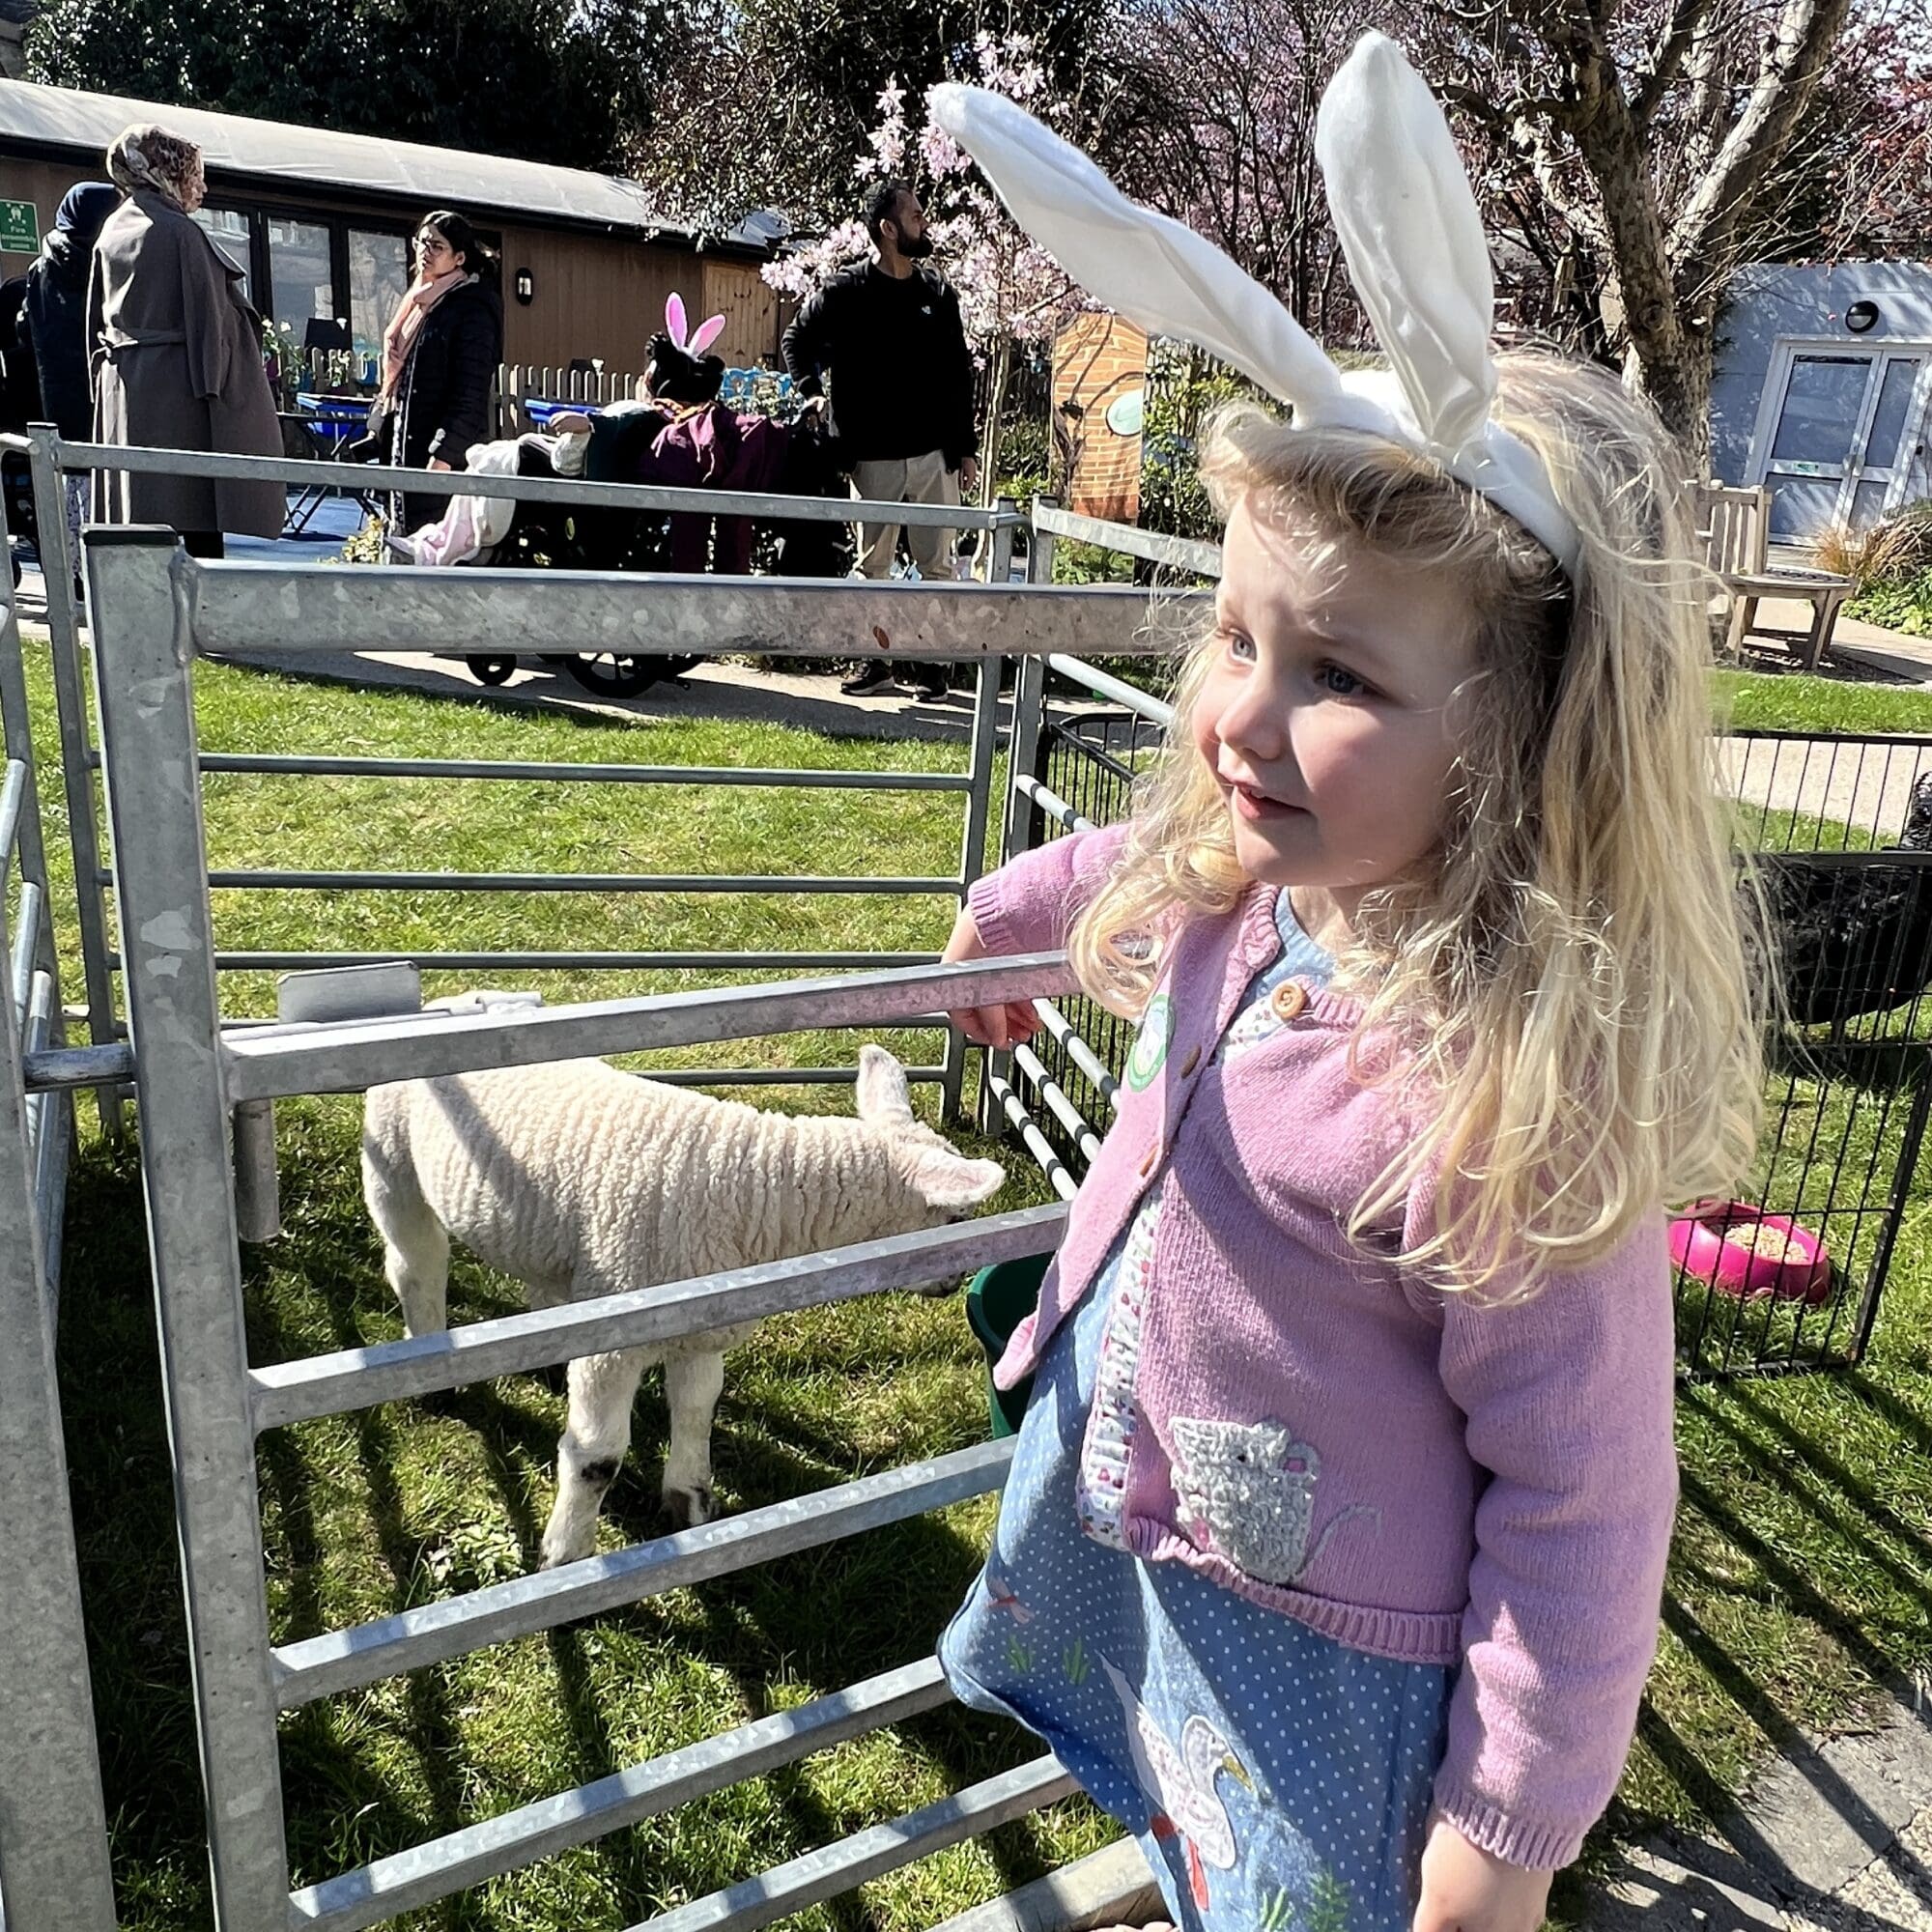 a little girl with bunny ears on smiling and pointing at a lamb